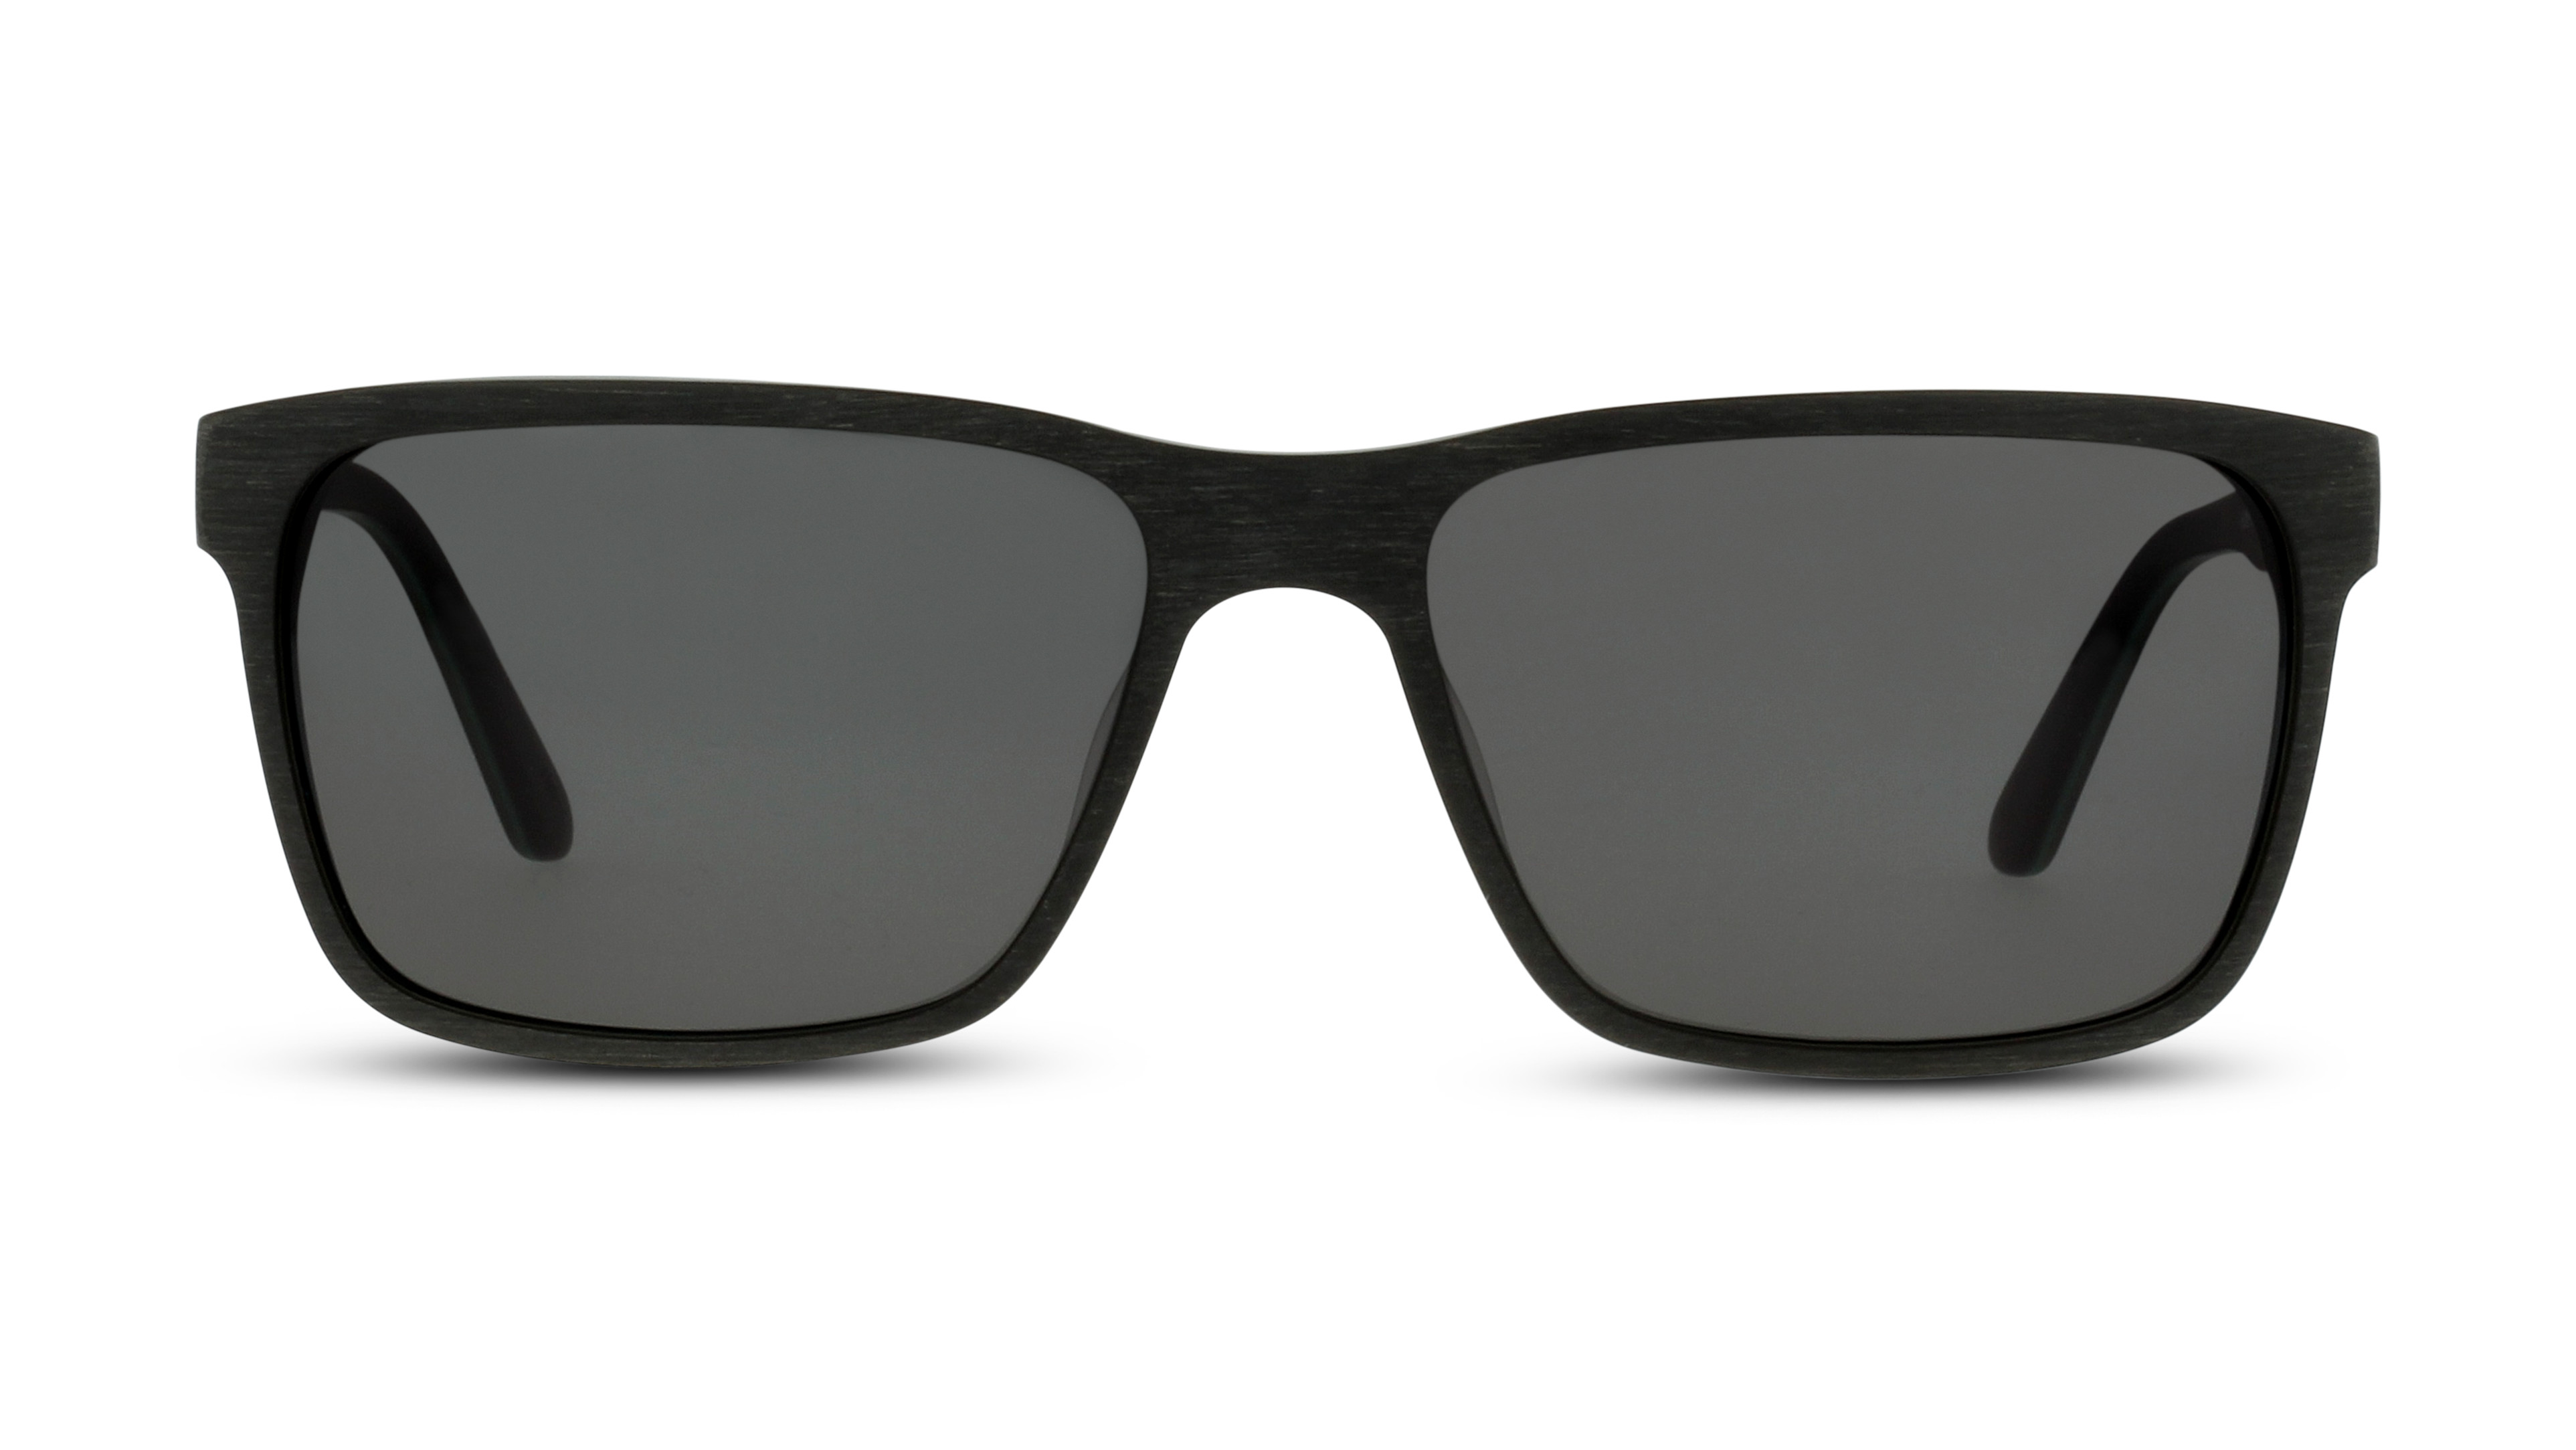 [products.image.front] HUMPHREY´S eyewear 588088 302040 Sonnenbrille